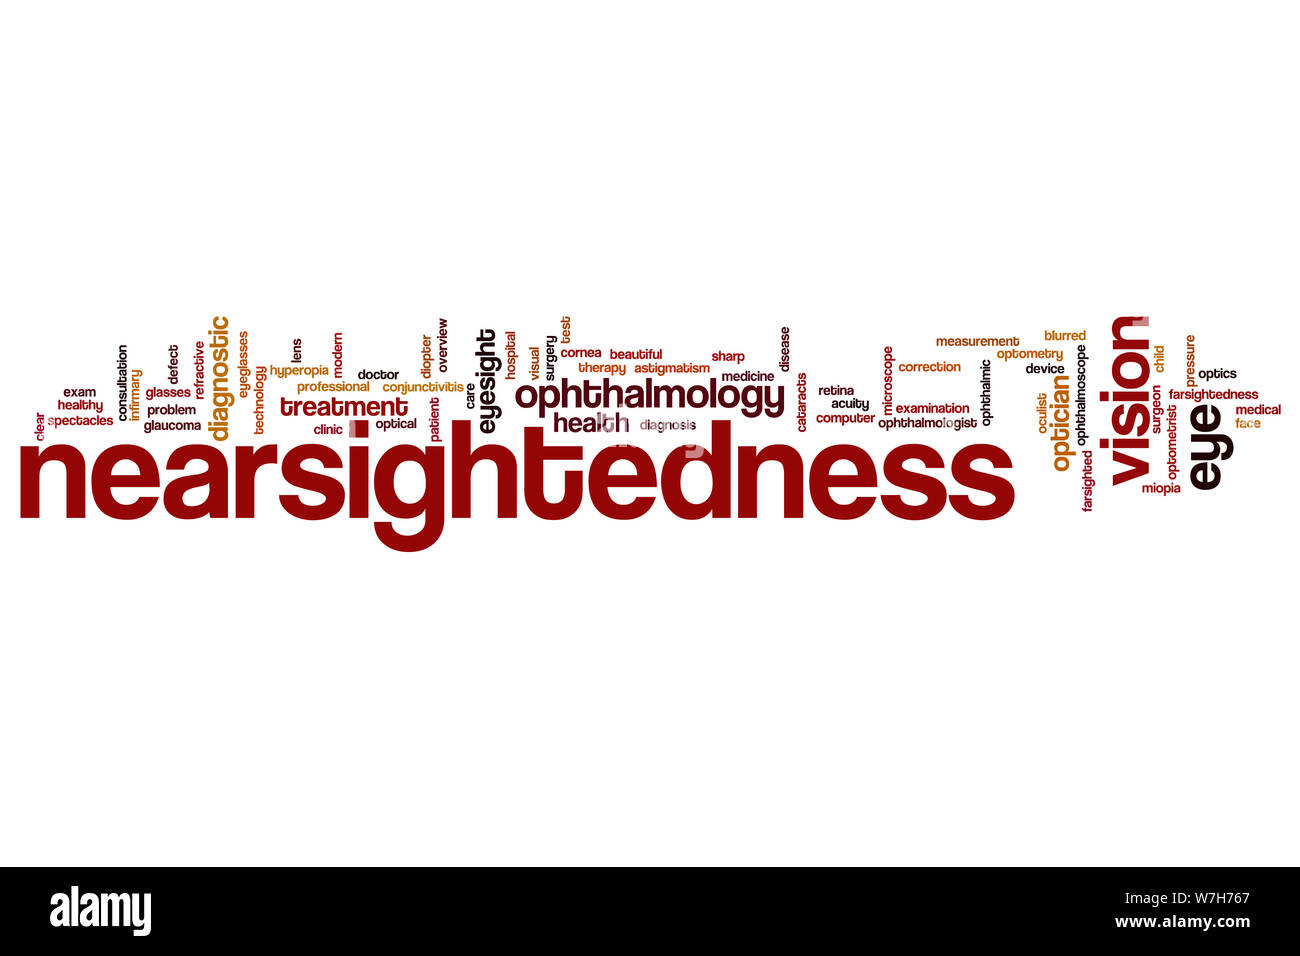 Nearsightedness word cloud concept Stock Photo